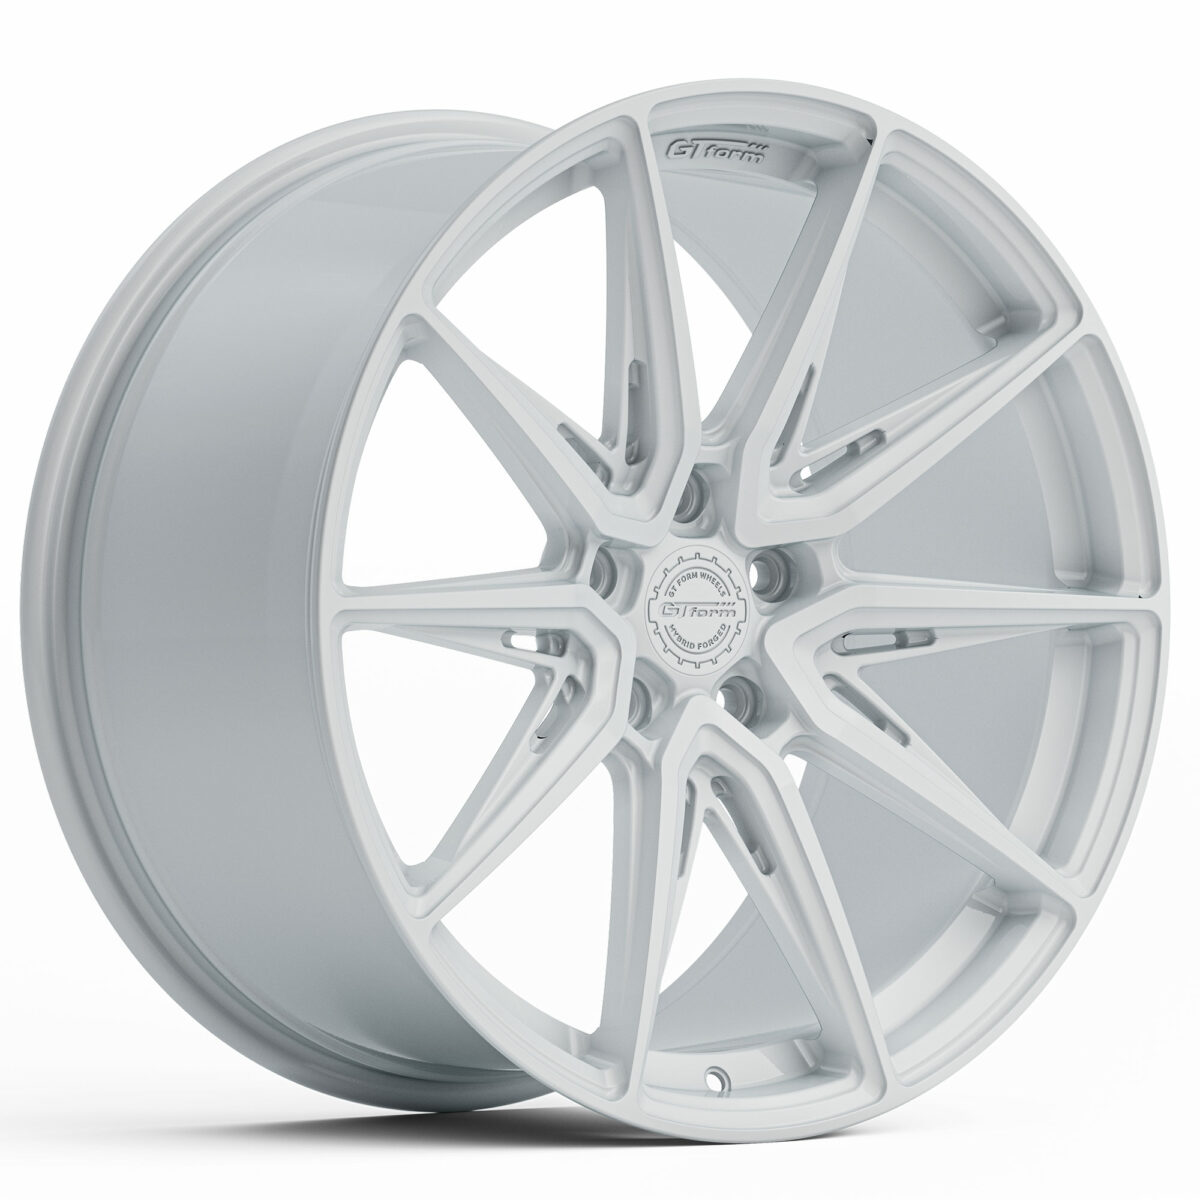 PERFORMANCE WHEELS GT FORM HF4.1 HYBRID FORGED GLOSS WHITE 20X9 20X10.5 20X12 STAGGERED RIMS